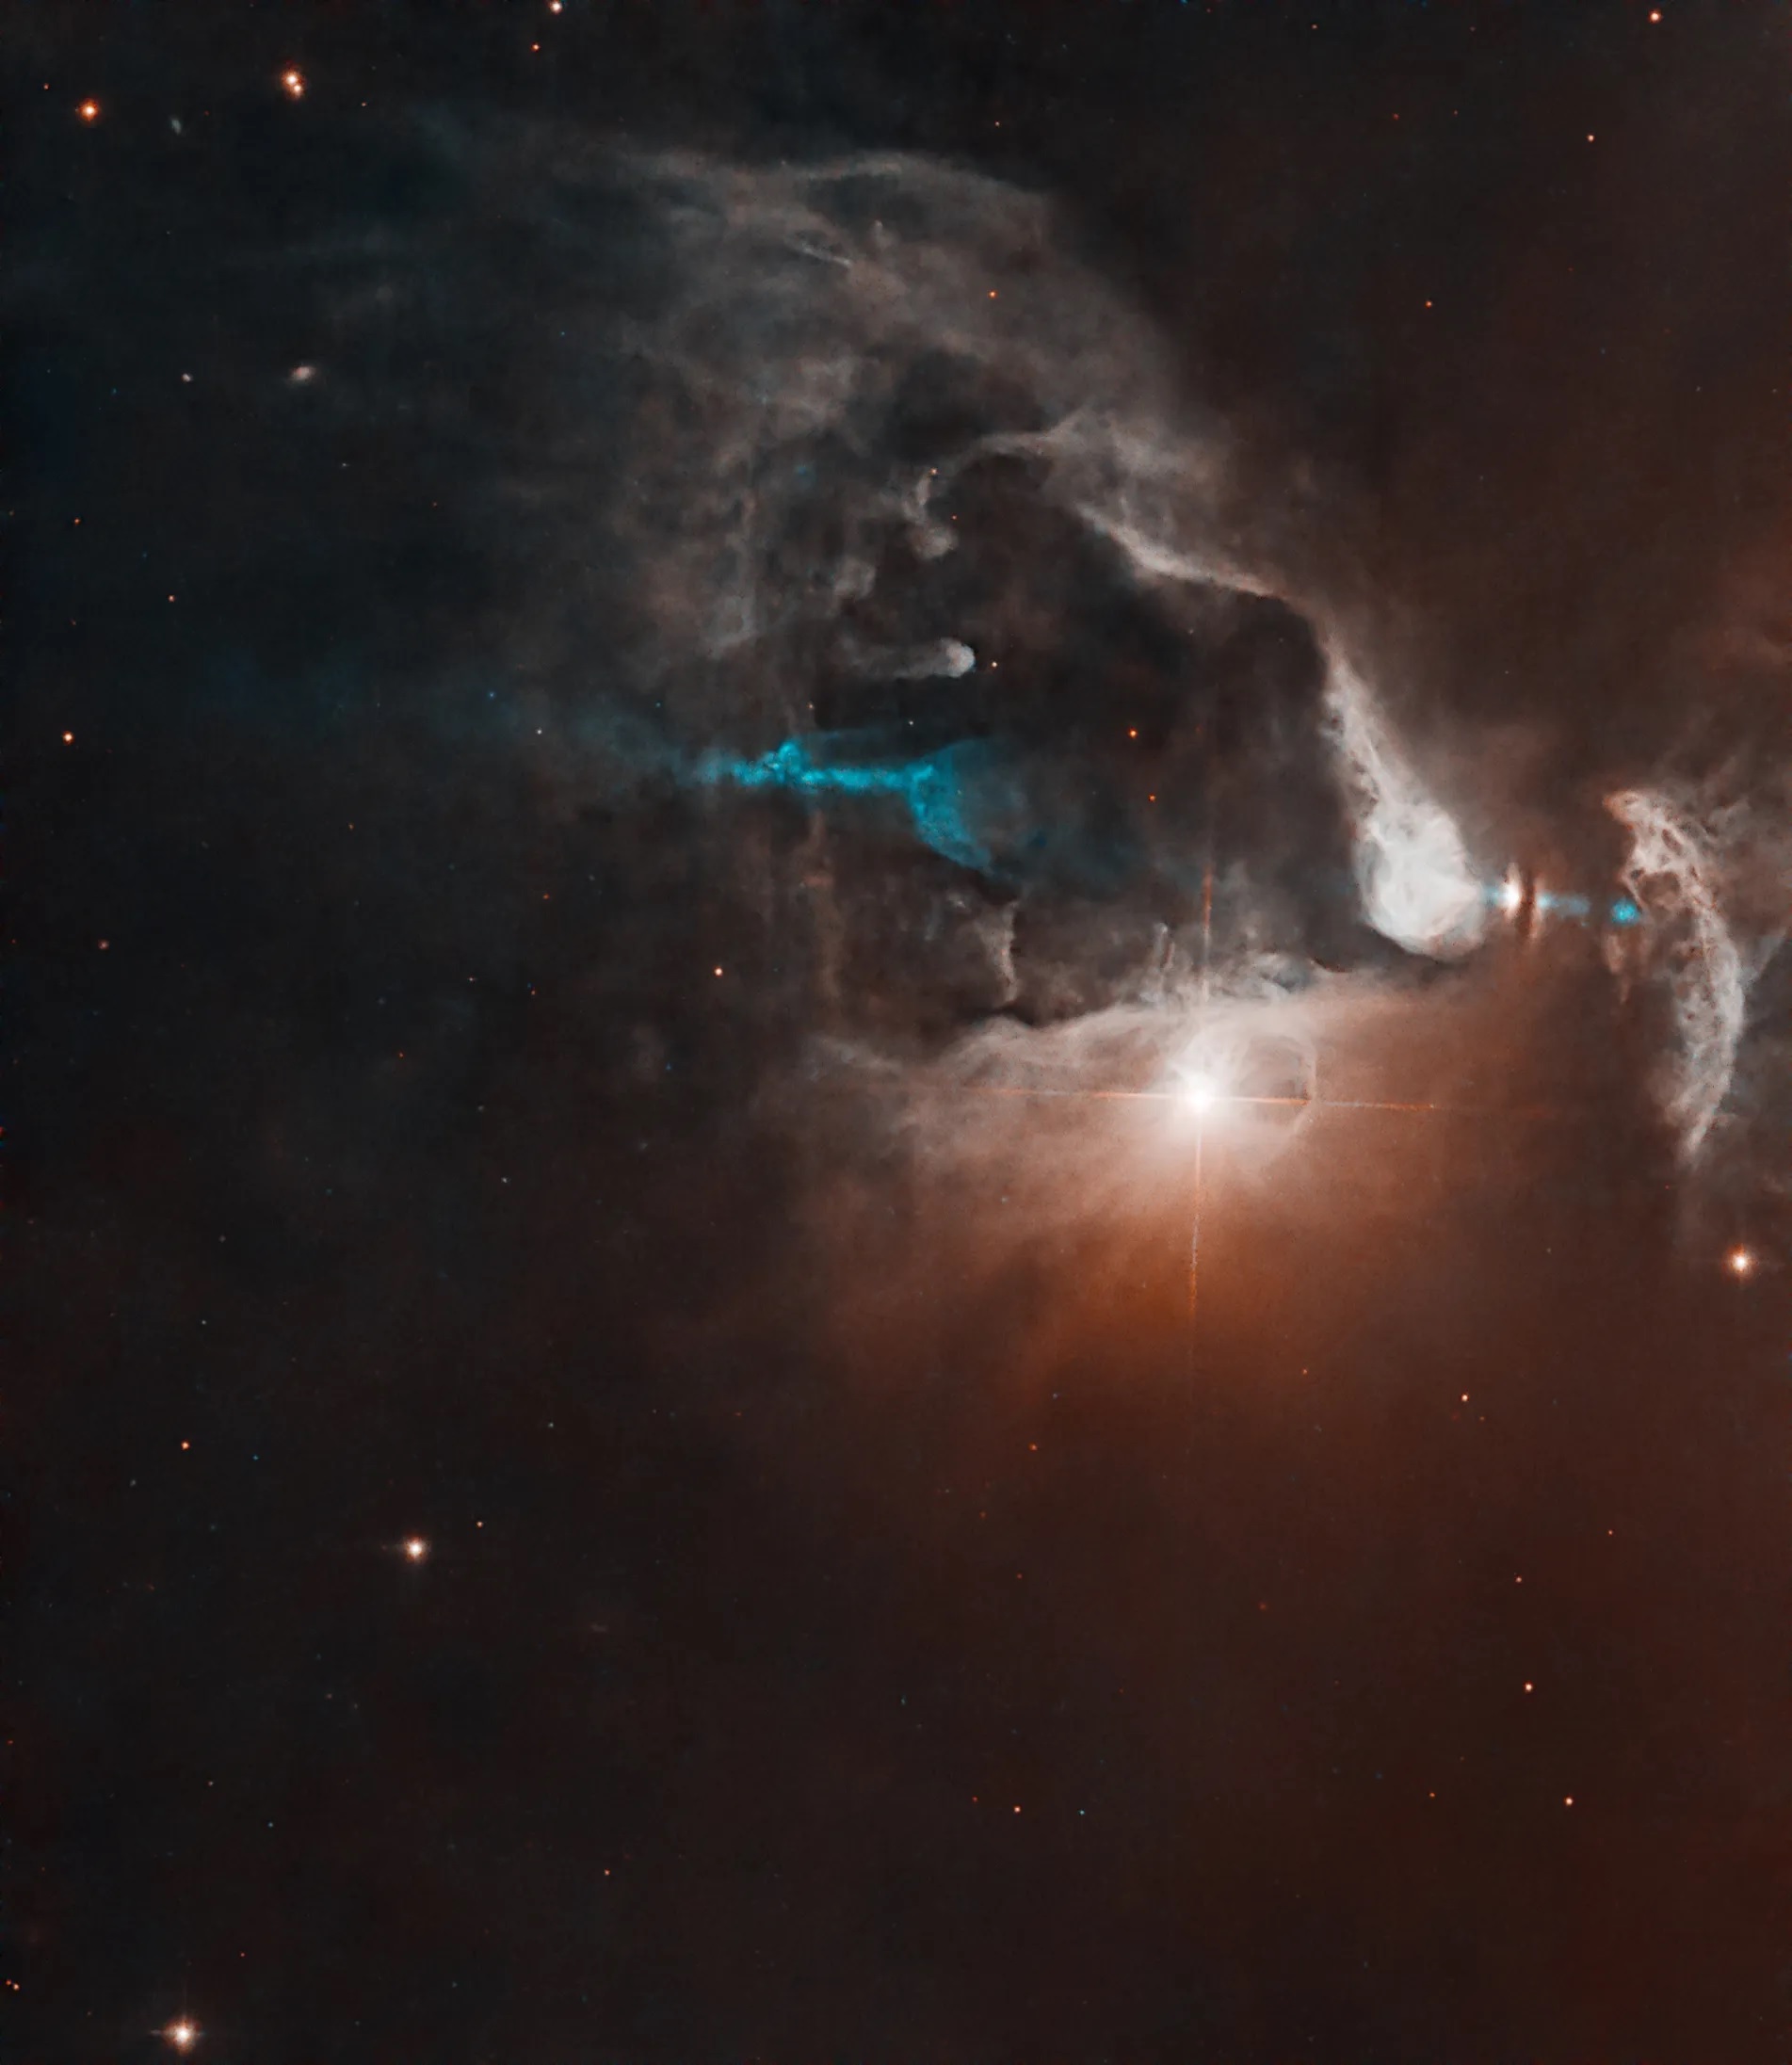 NASA+Hubble+Space+Telescope+features+the+FS+Tau+star